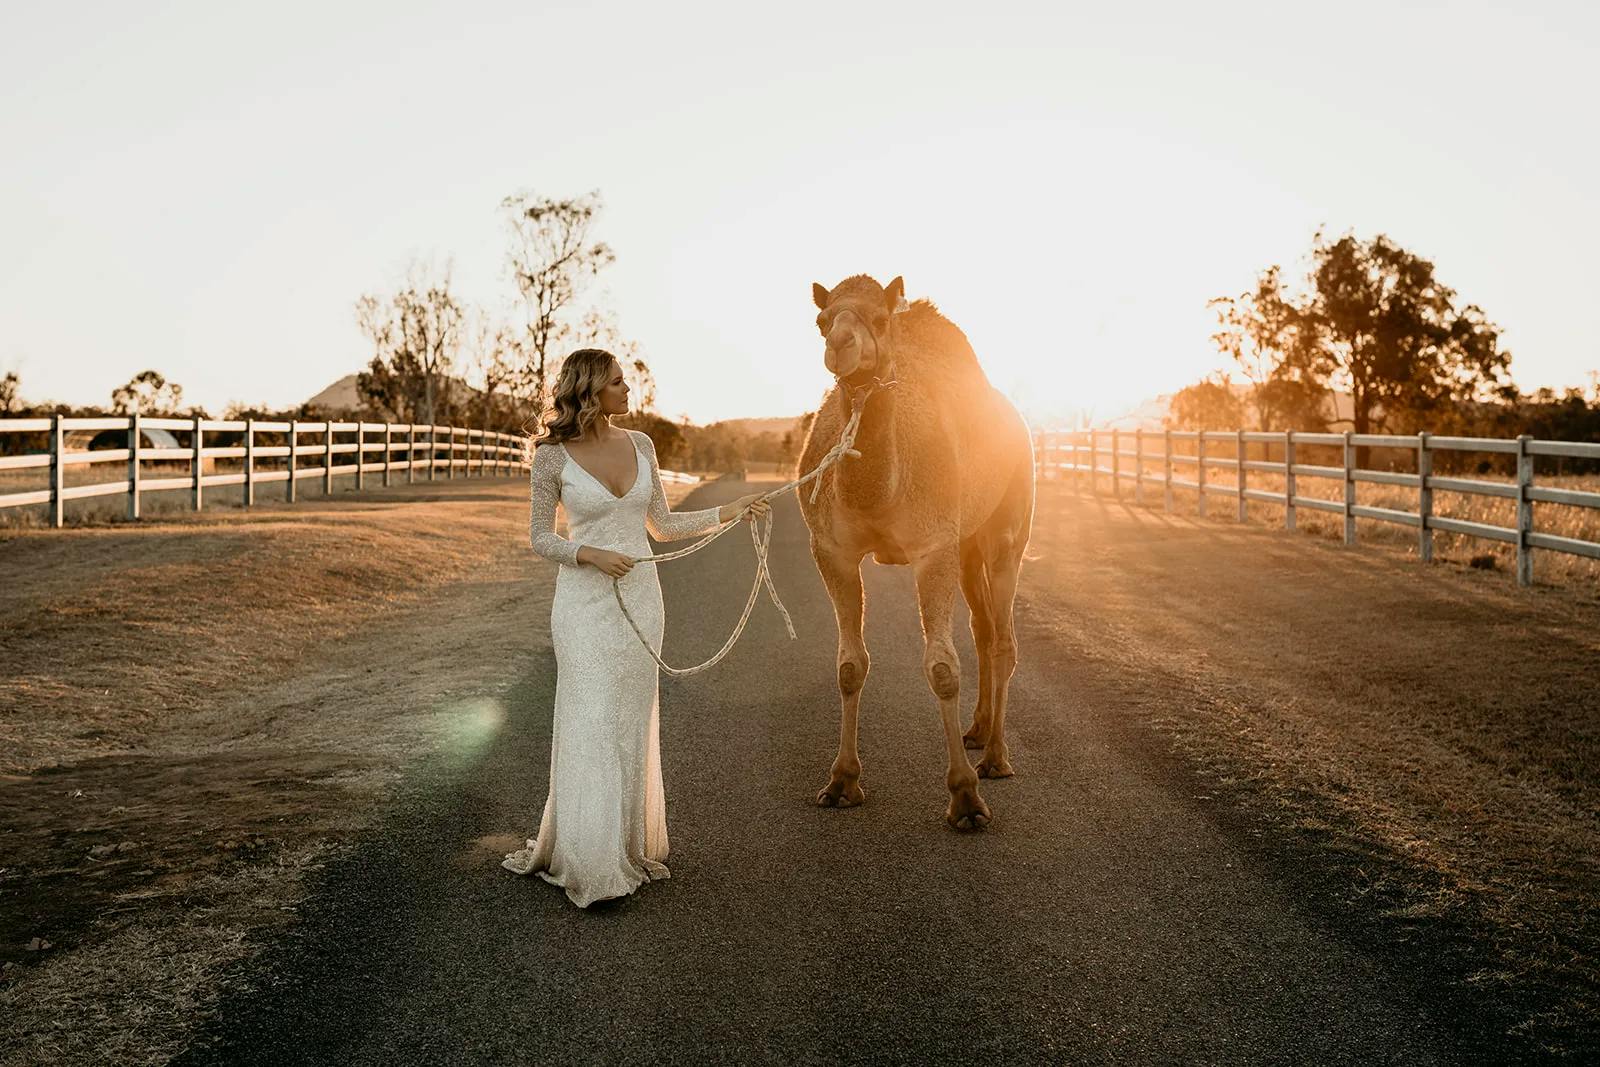 A person in a white dress stands on a paved road at sunset, holding a rope tied to a camel. Wooden fences line both sides of the road, and the glowing sun is setting in the background, casting a golden light over the scene.